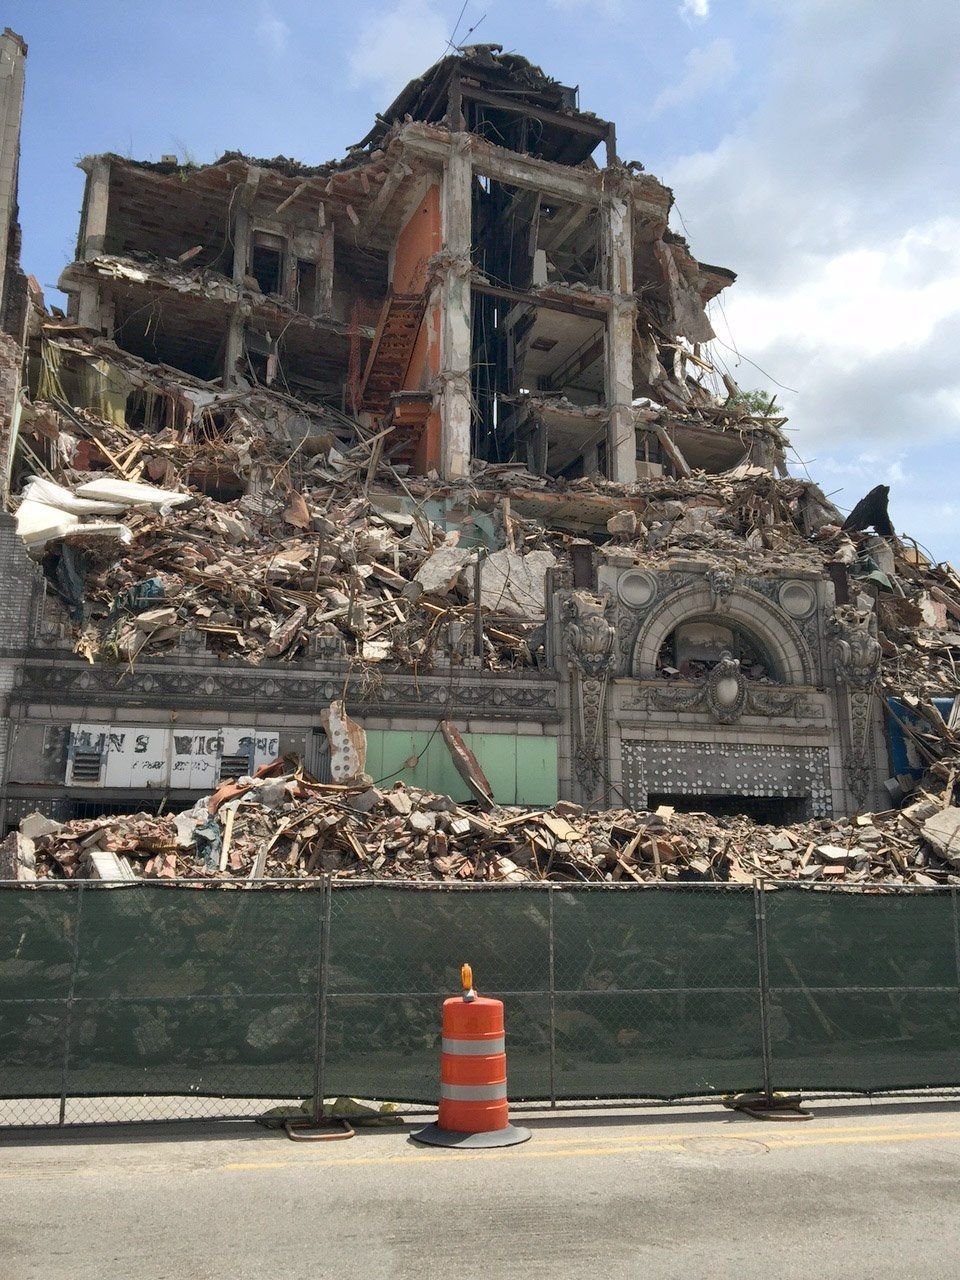 Landmark Murphy Building in East St. Louis largely reduced to rubble | Illinois | comicsahoy.com